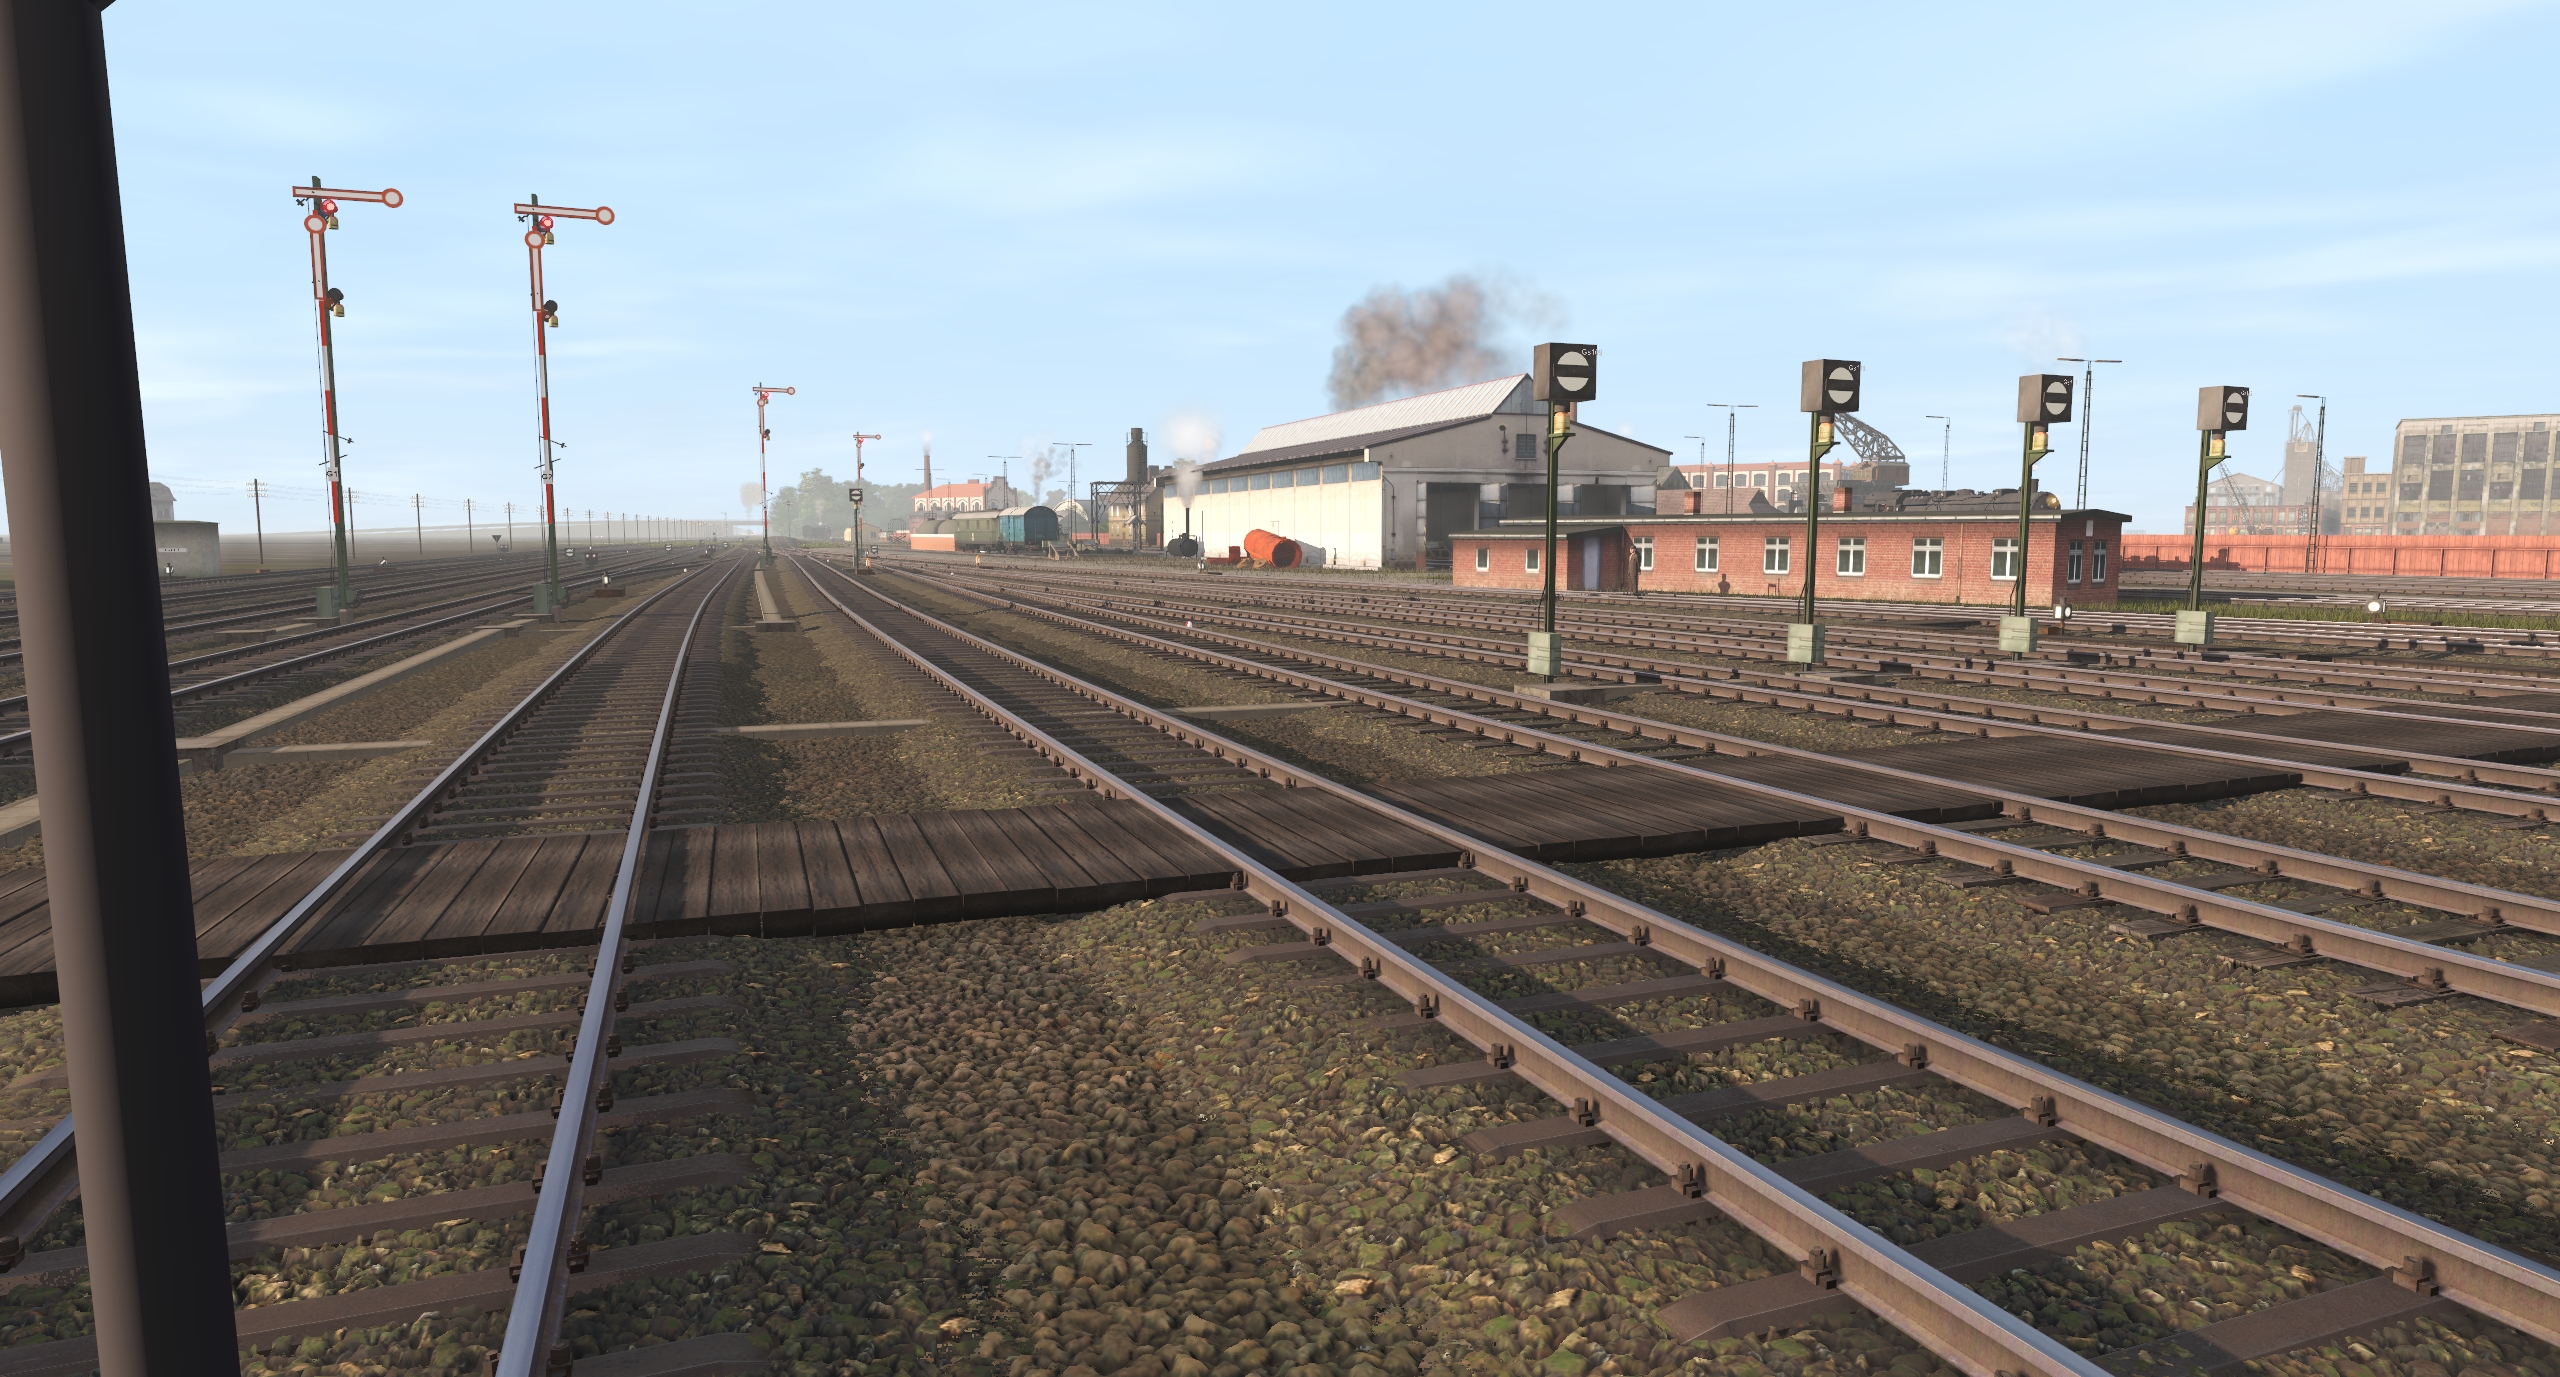 BW Buchloe, now with engine shed